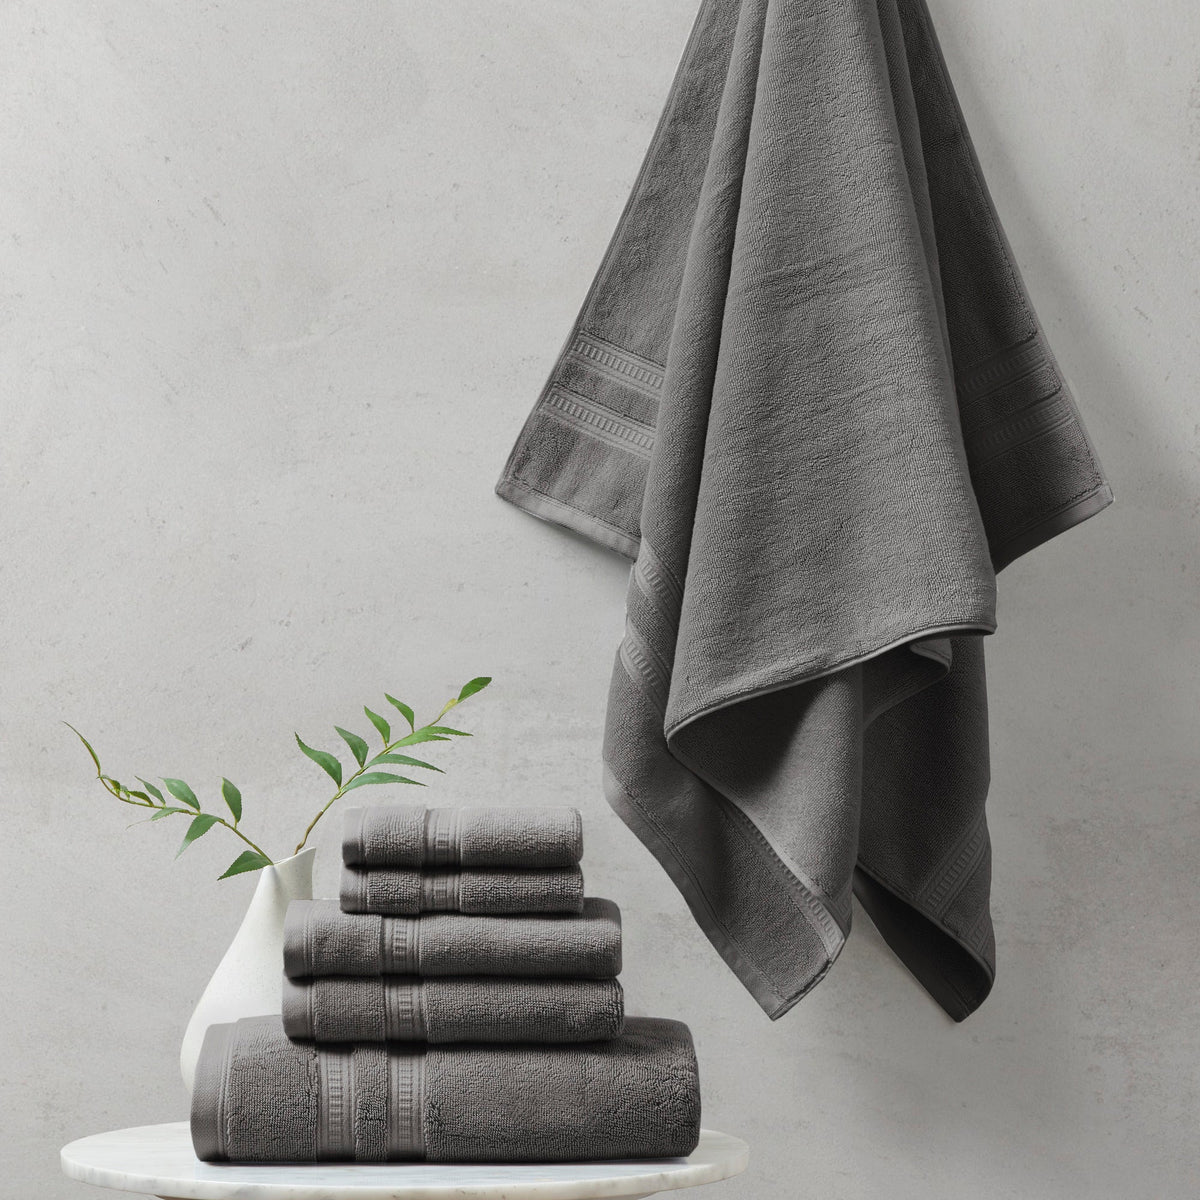 Plume 100% Cotton Feather Touch Antimicrobial Towel 6 Piece Set Charcoal